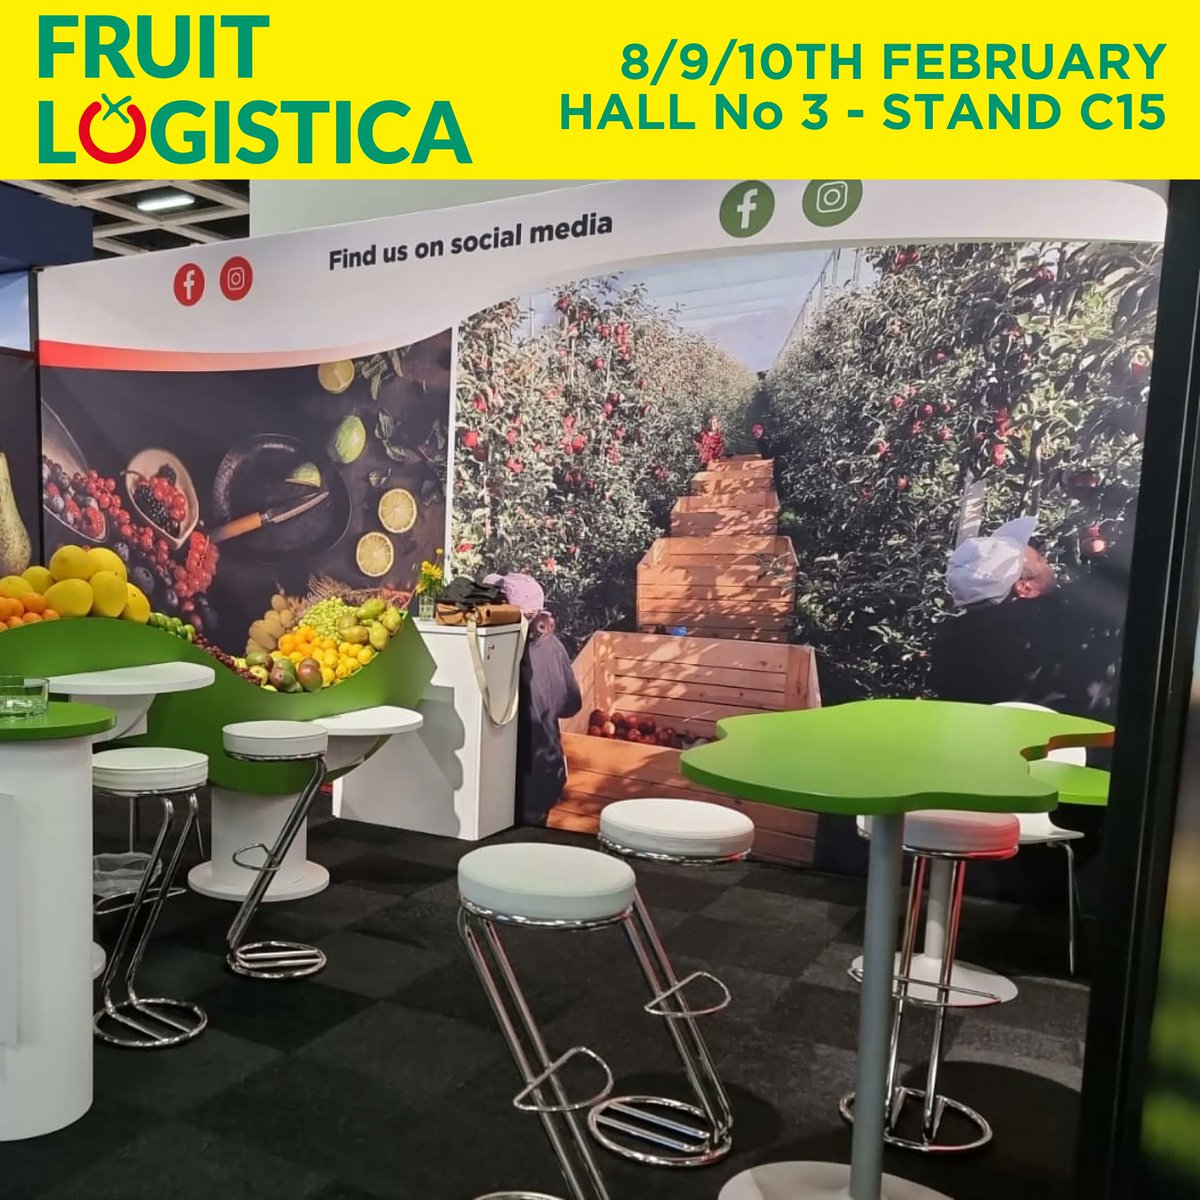 Our Fruit Logistica Stand is now OPEN! Don't forget to come and say hello! We cant wait to see you all in Hall 3 Stand C15.

#fruitlogistica2023 #fruitlogistica #berlin #germany #fruit #fruits #freshproduce #messeberlin #networking #tradeshow #international #veg #vegetables